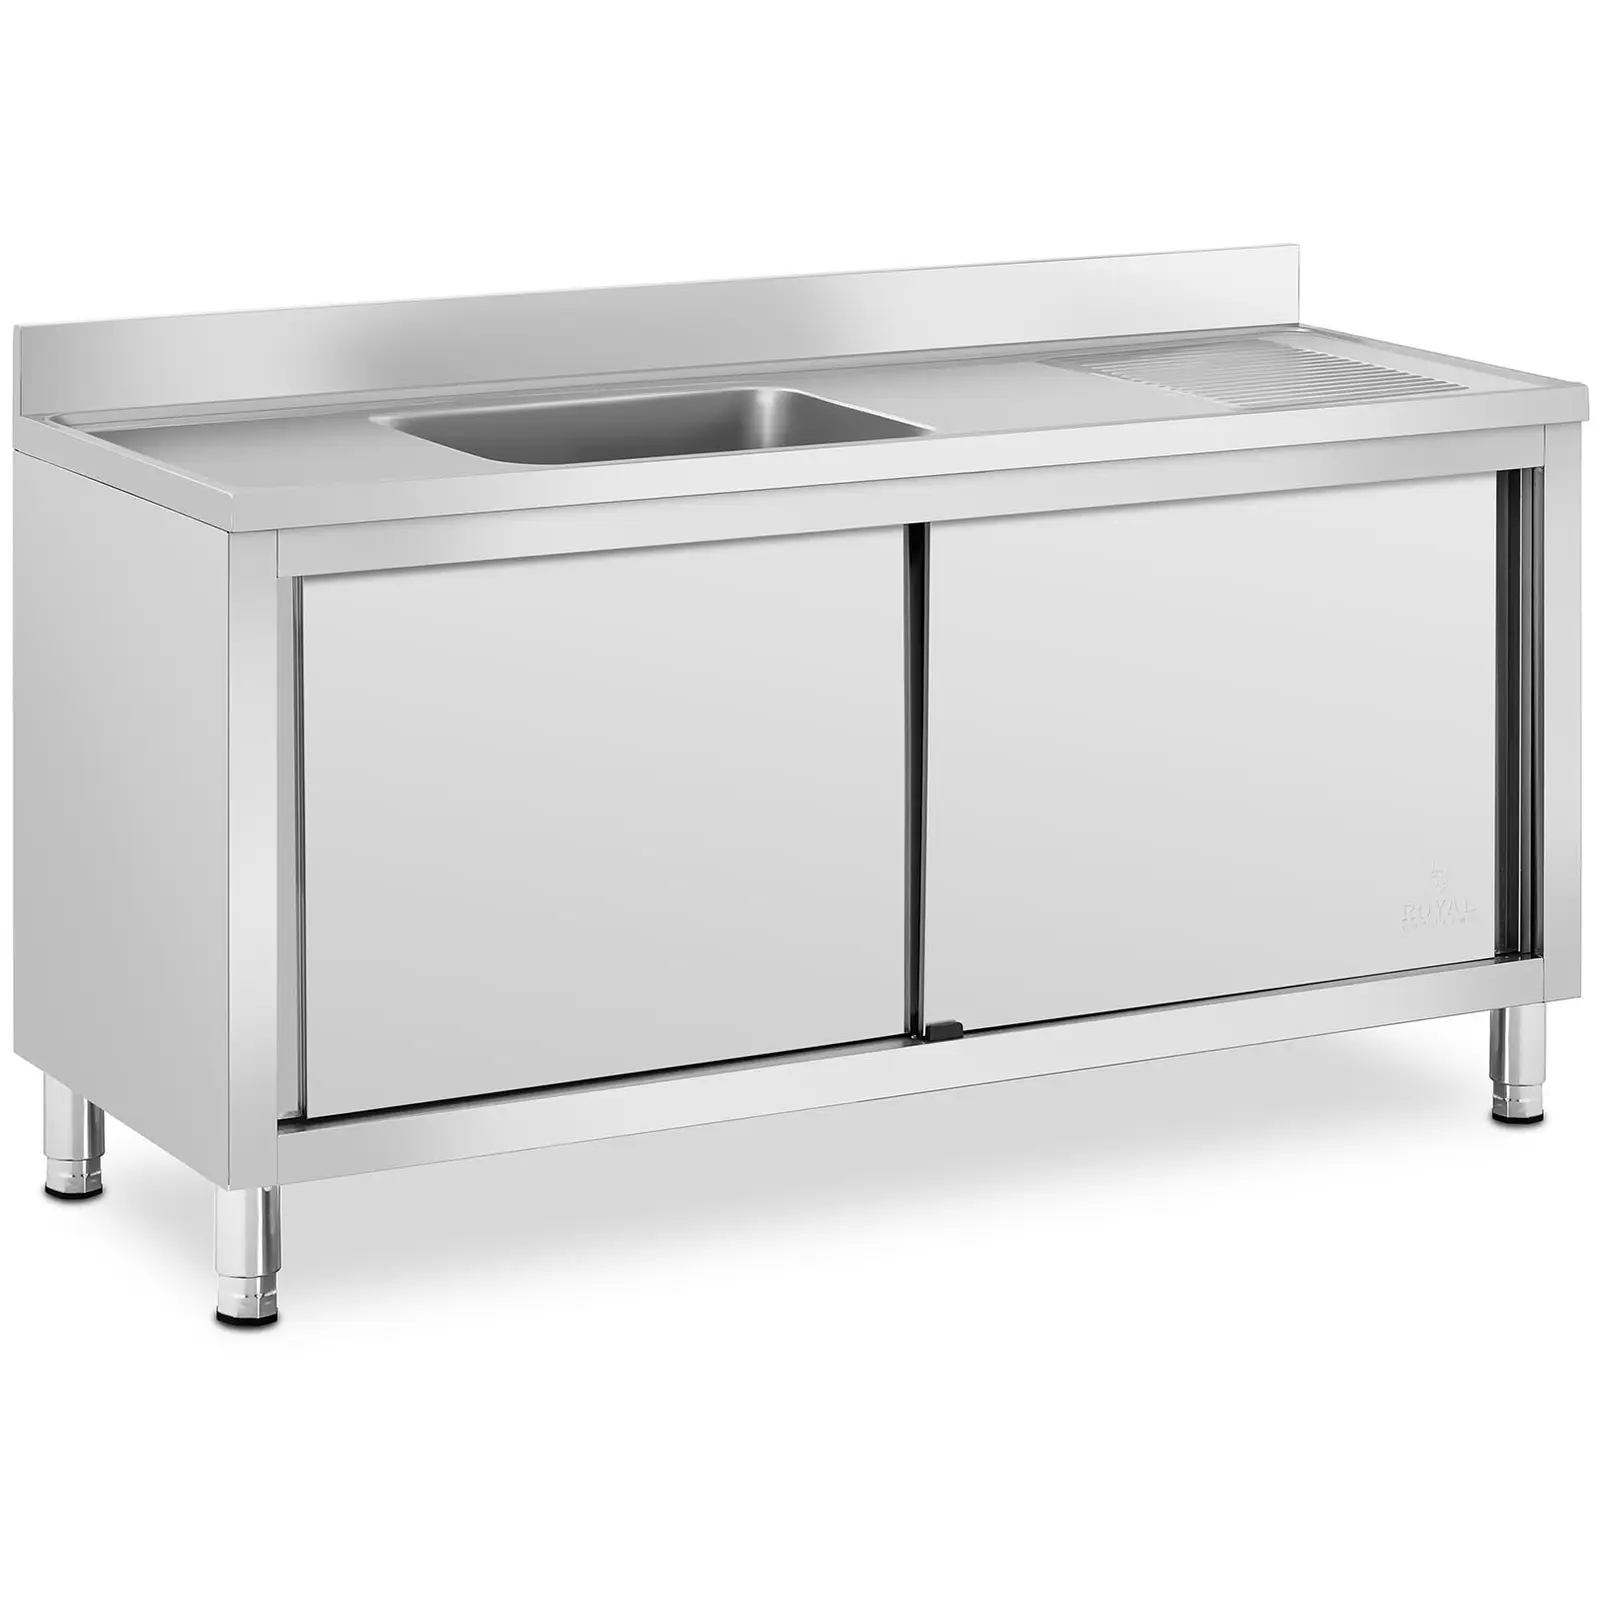 Stainless Steel Sink - 1 basin - Royal Catering - Stainless steel - 500 x 400 x 240 mm